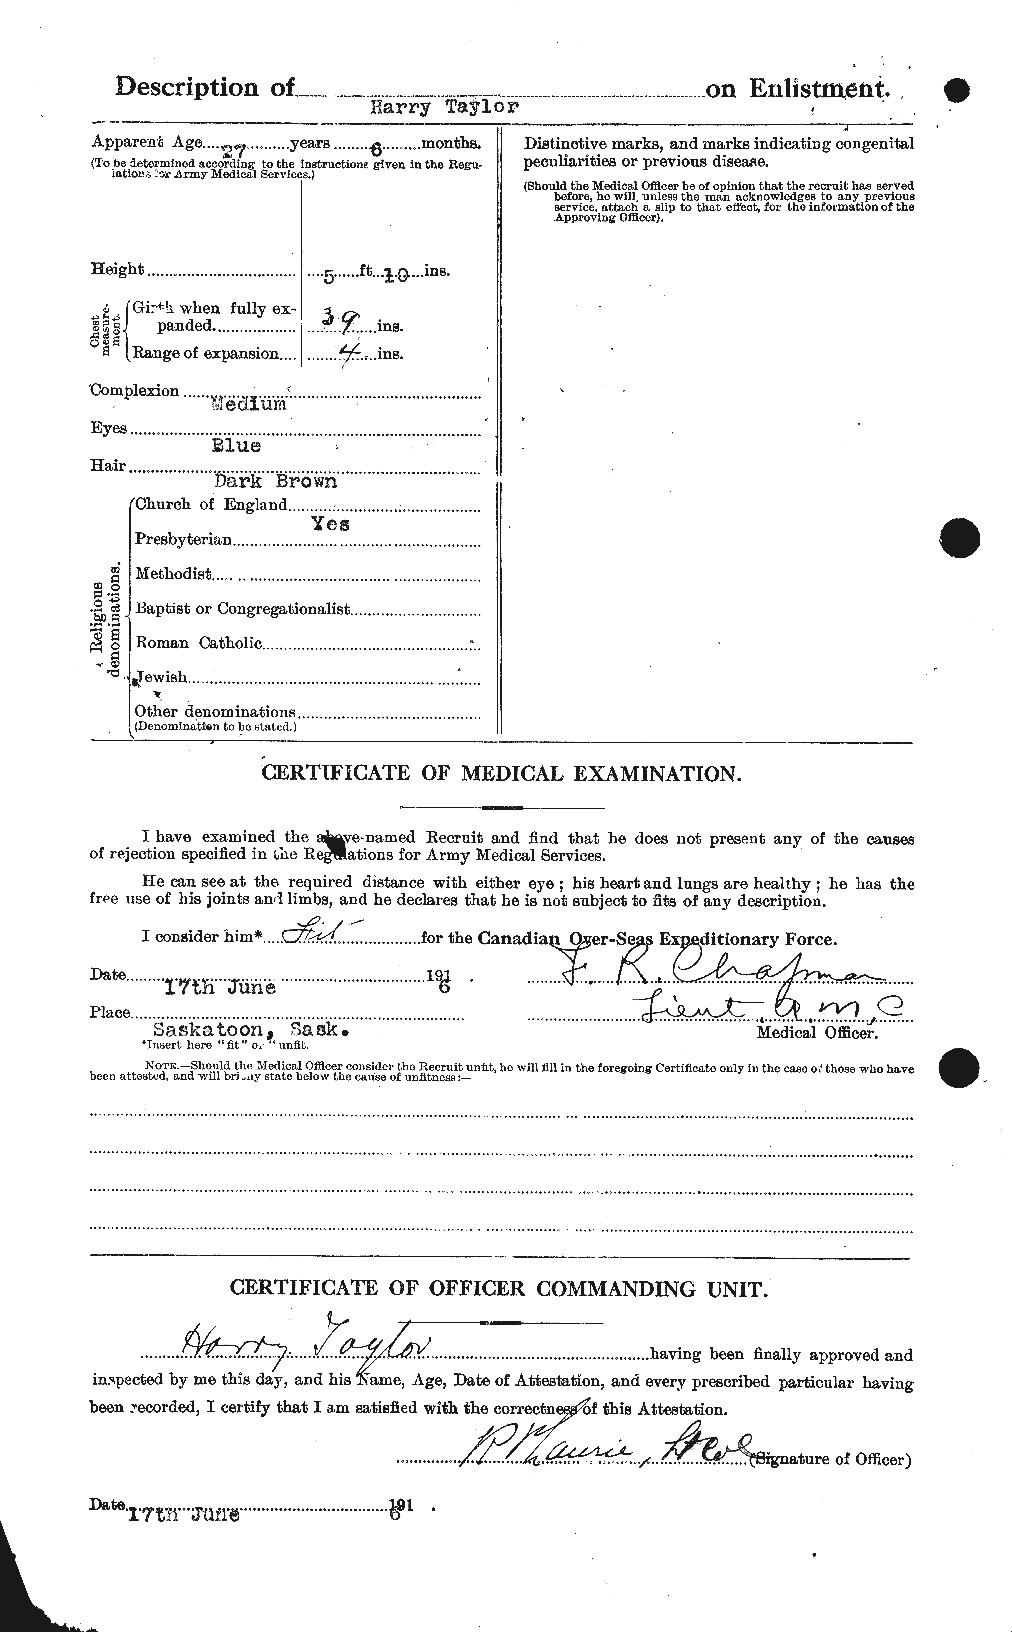 Personnel Records of the First World War - CEF 626453b